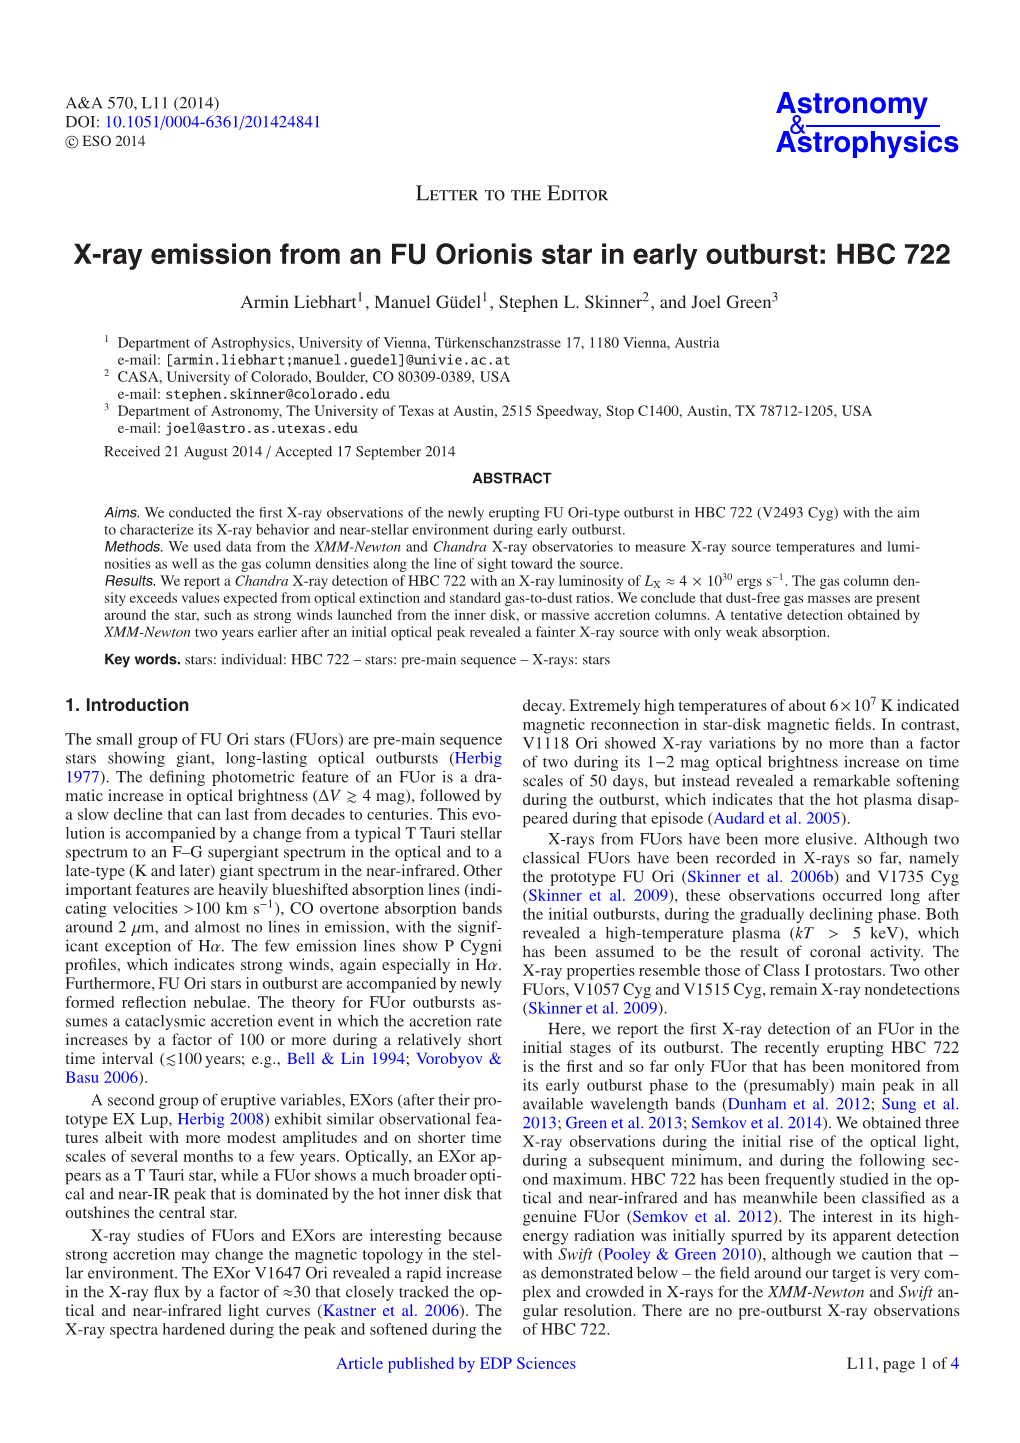 X-Ray Emission from an FU Orionis Star in Early Outburst: HBC 722